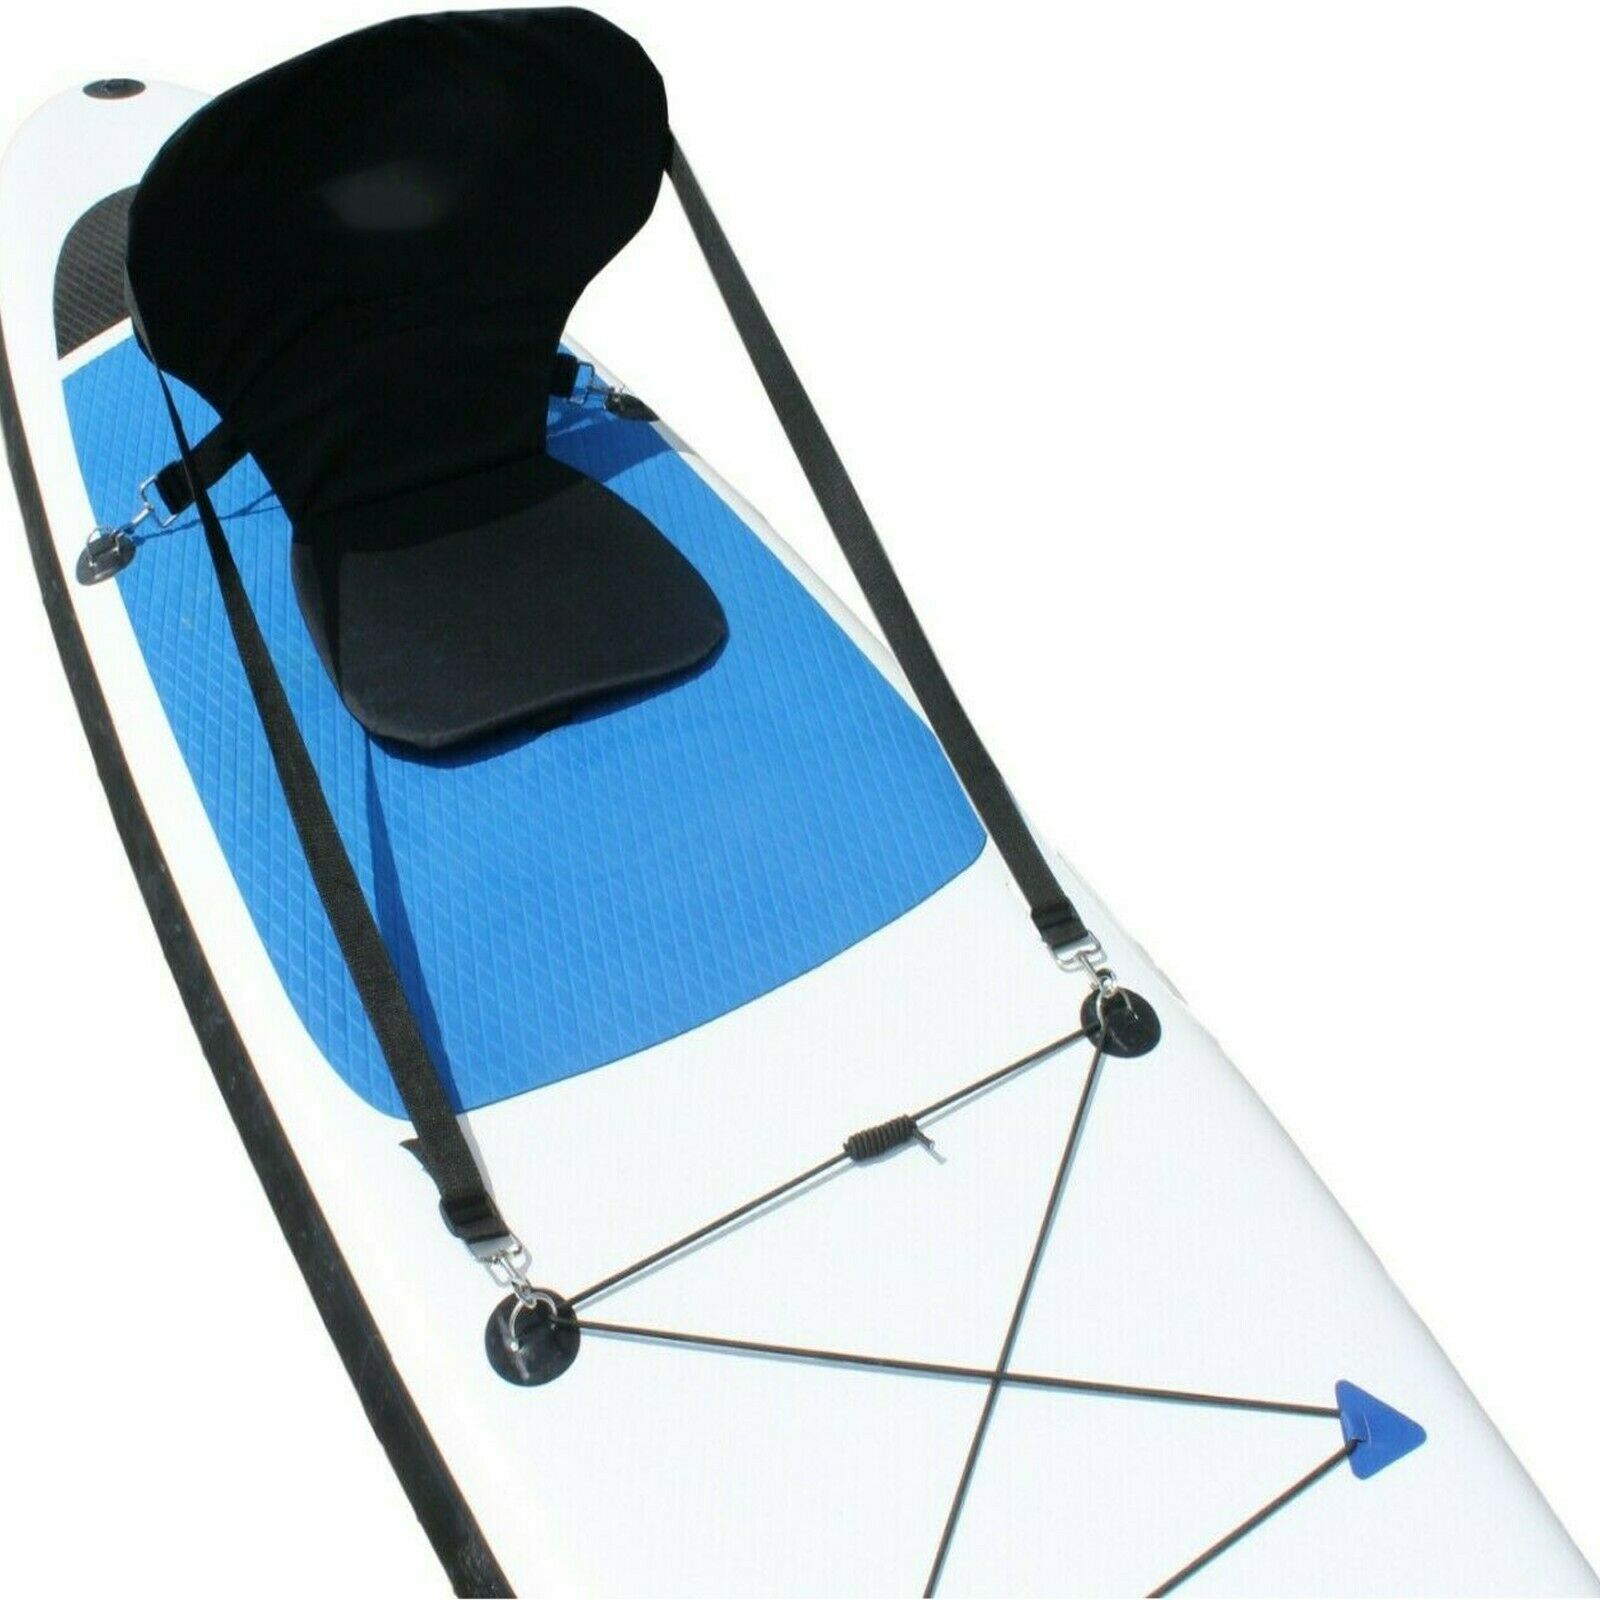 Paddleboard / Kayak / SUP Seat High Backrest GEEZY - The Magic Toy Shop